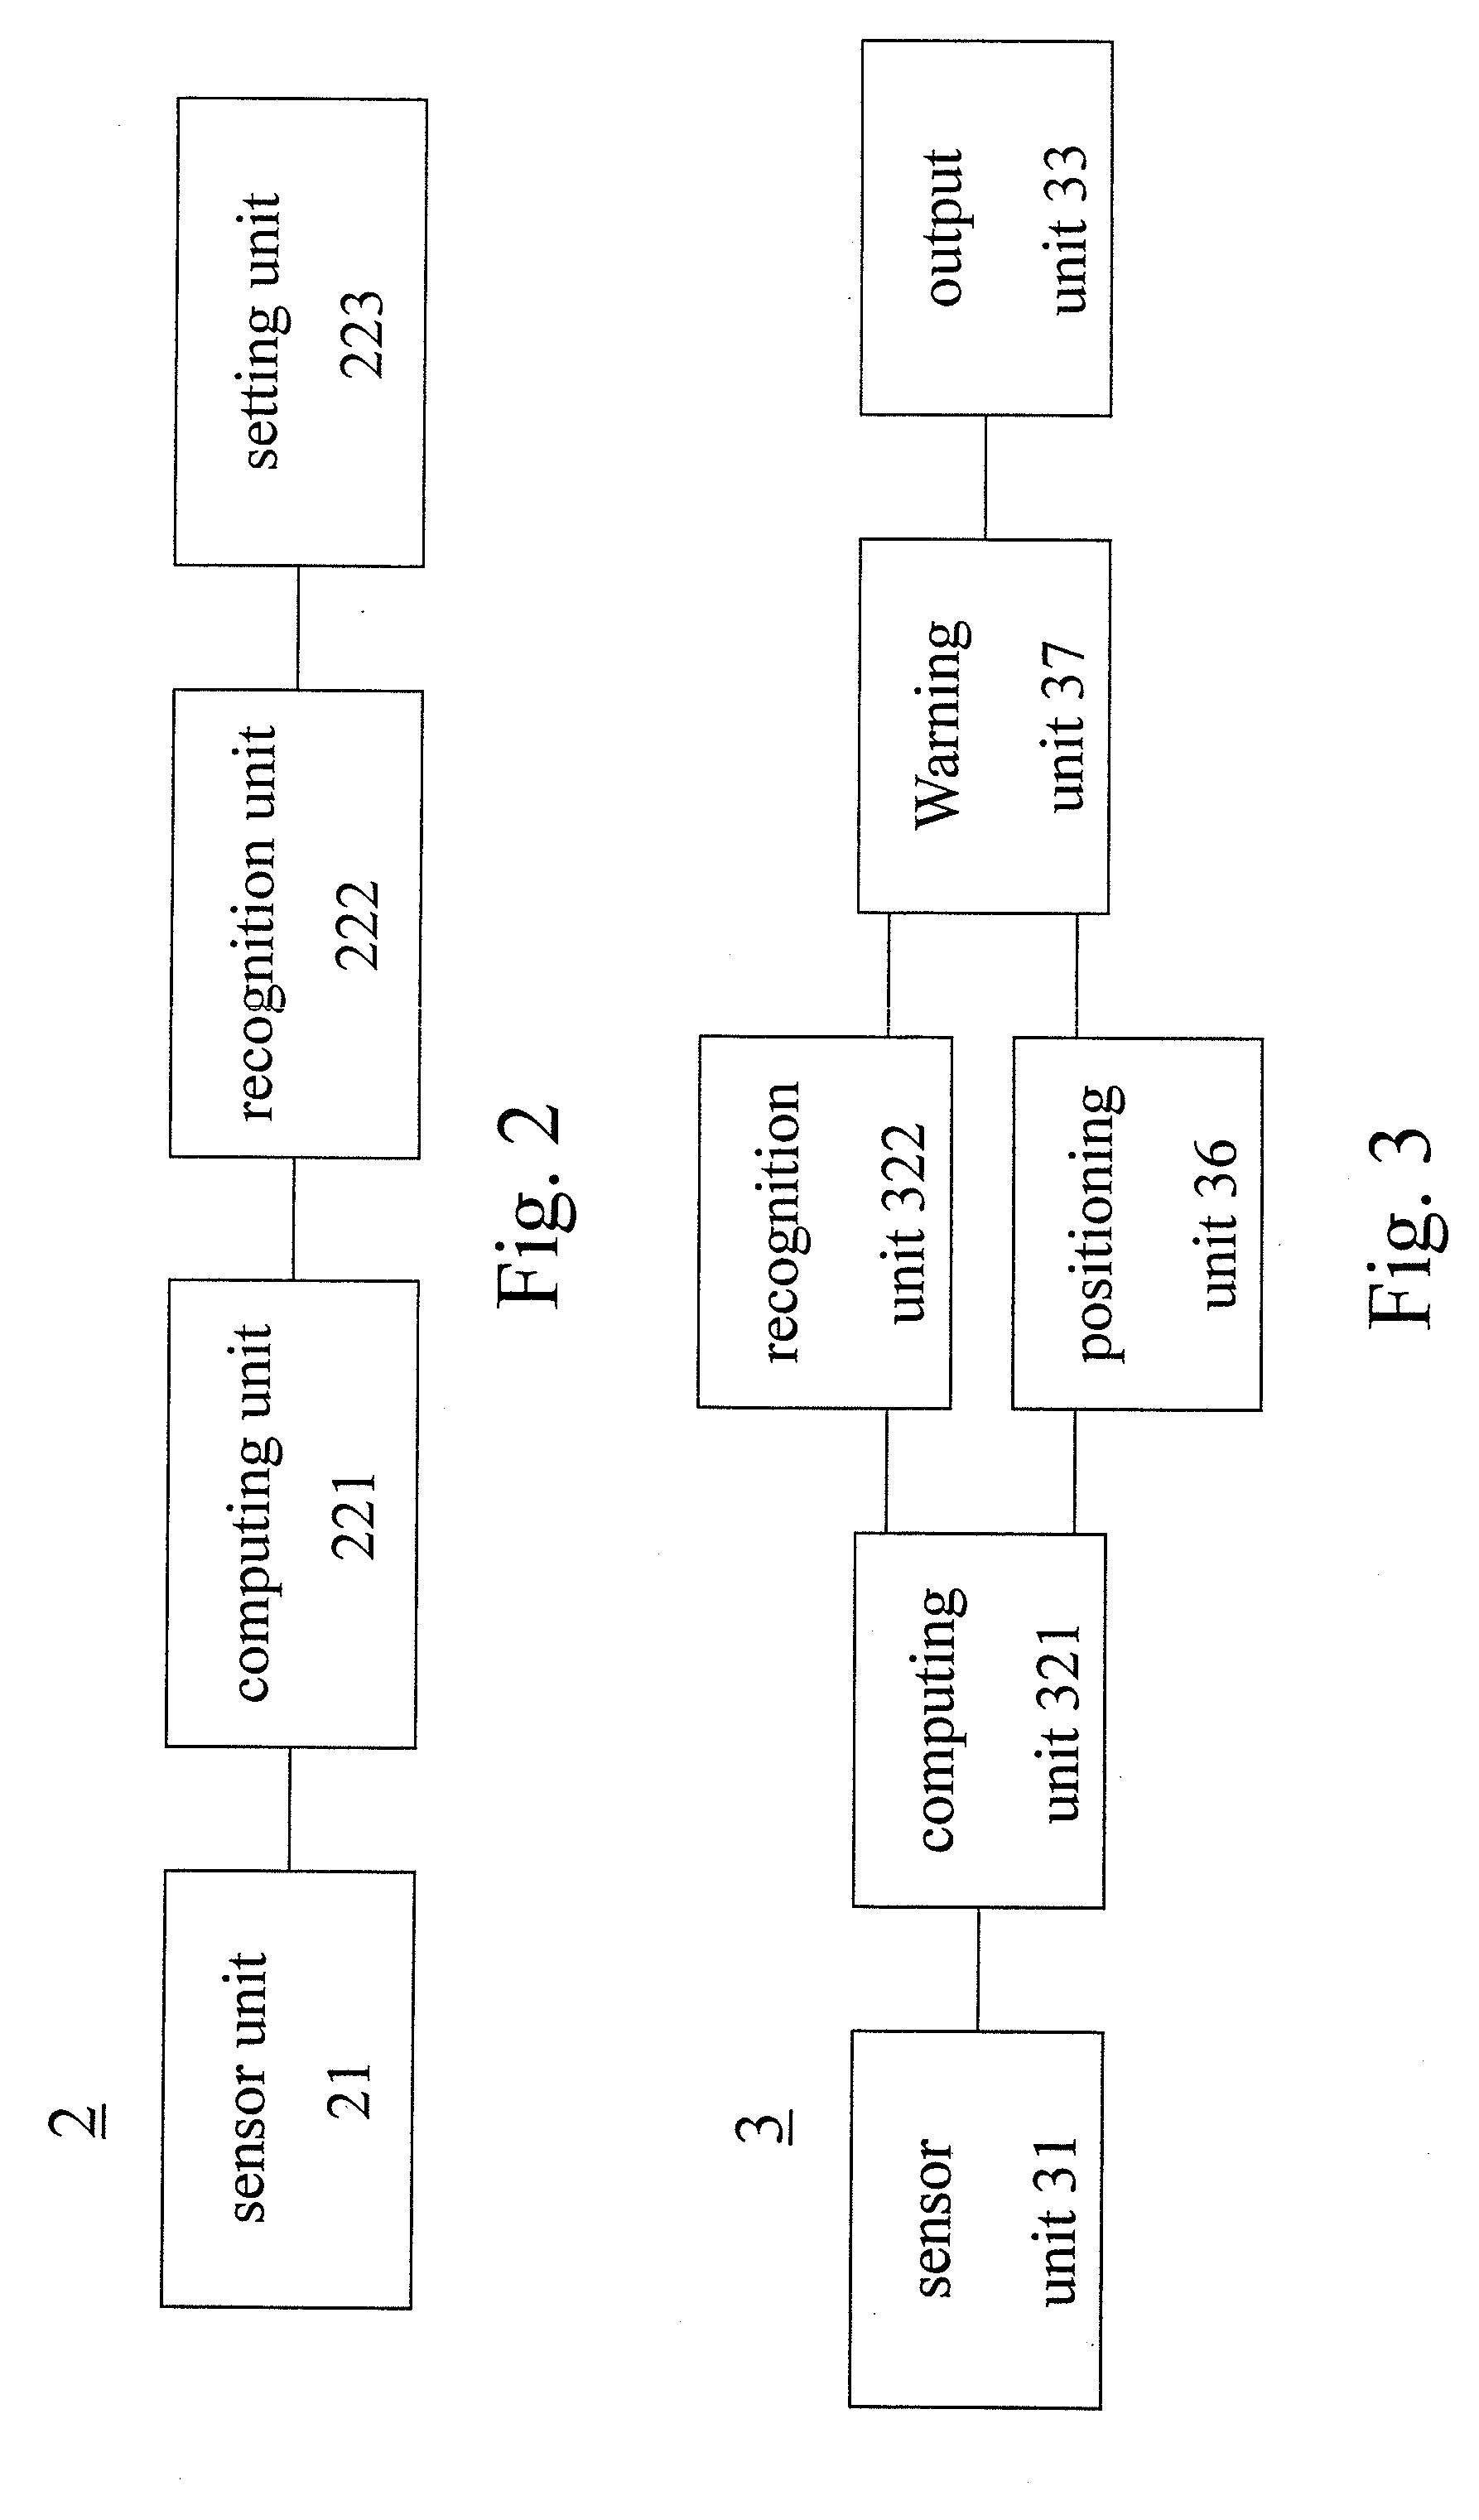 Apparatus for identifying falls and activities of daily living